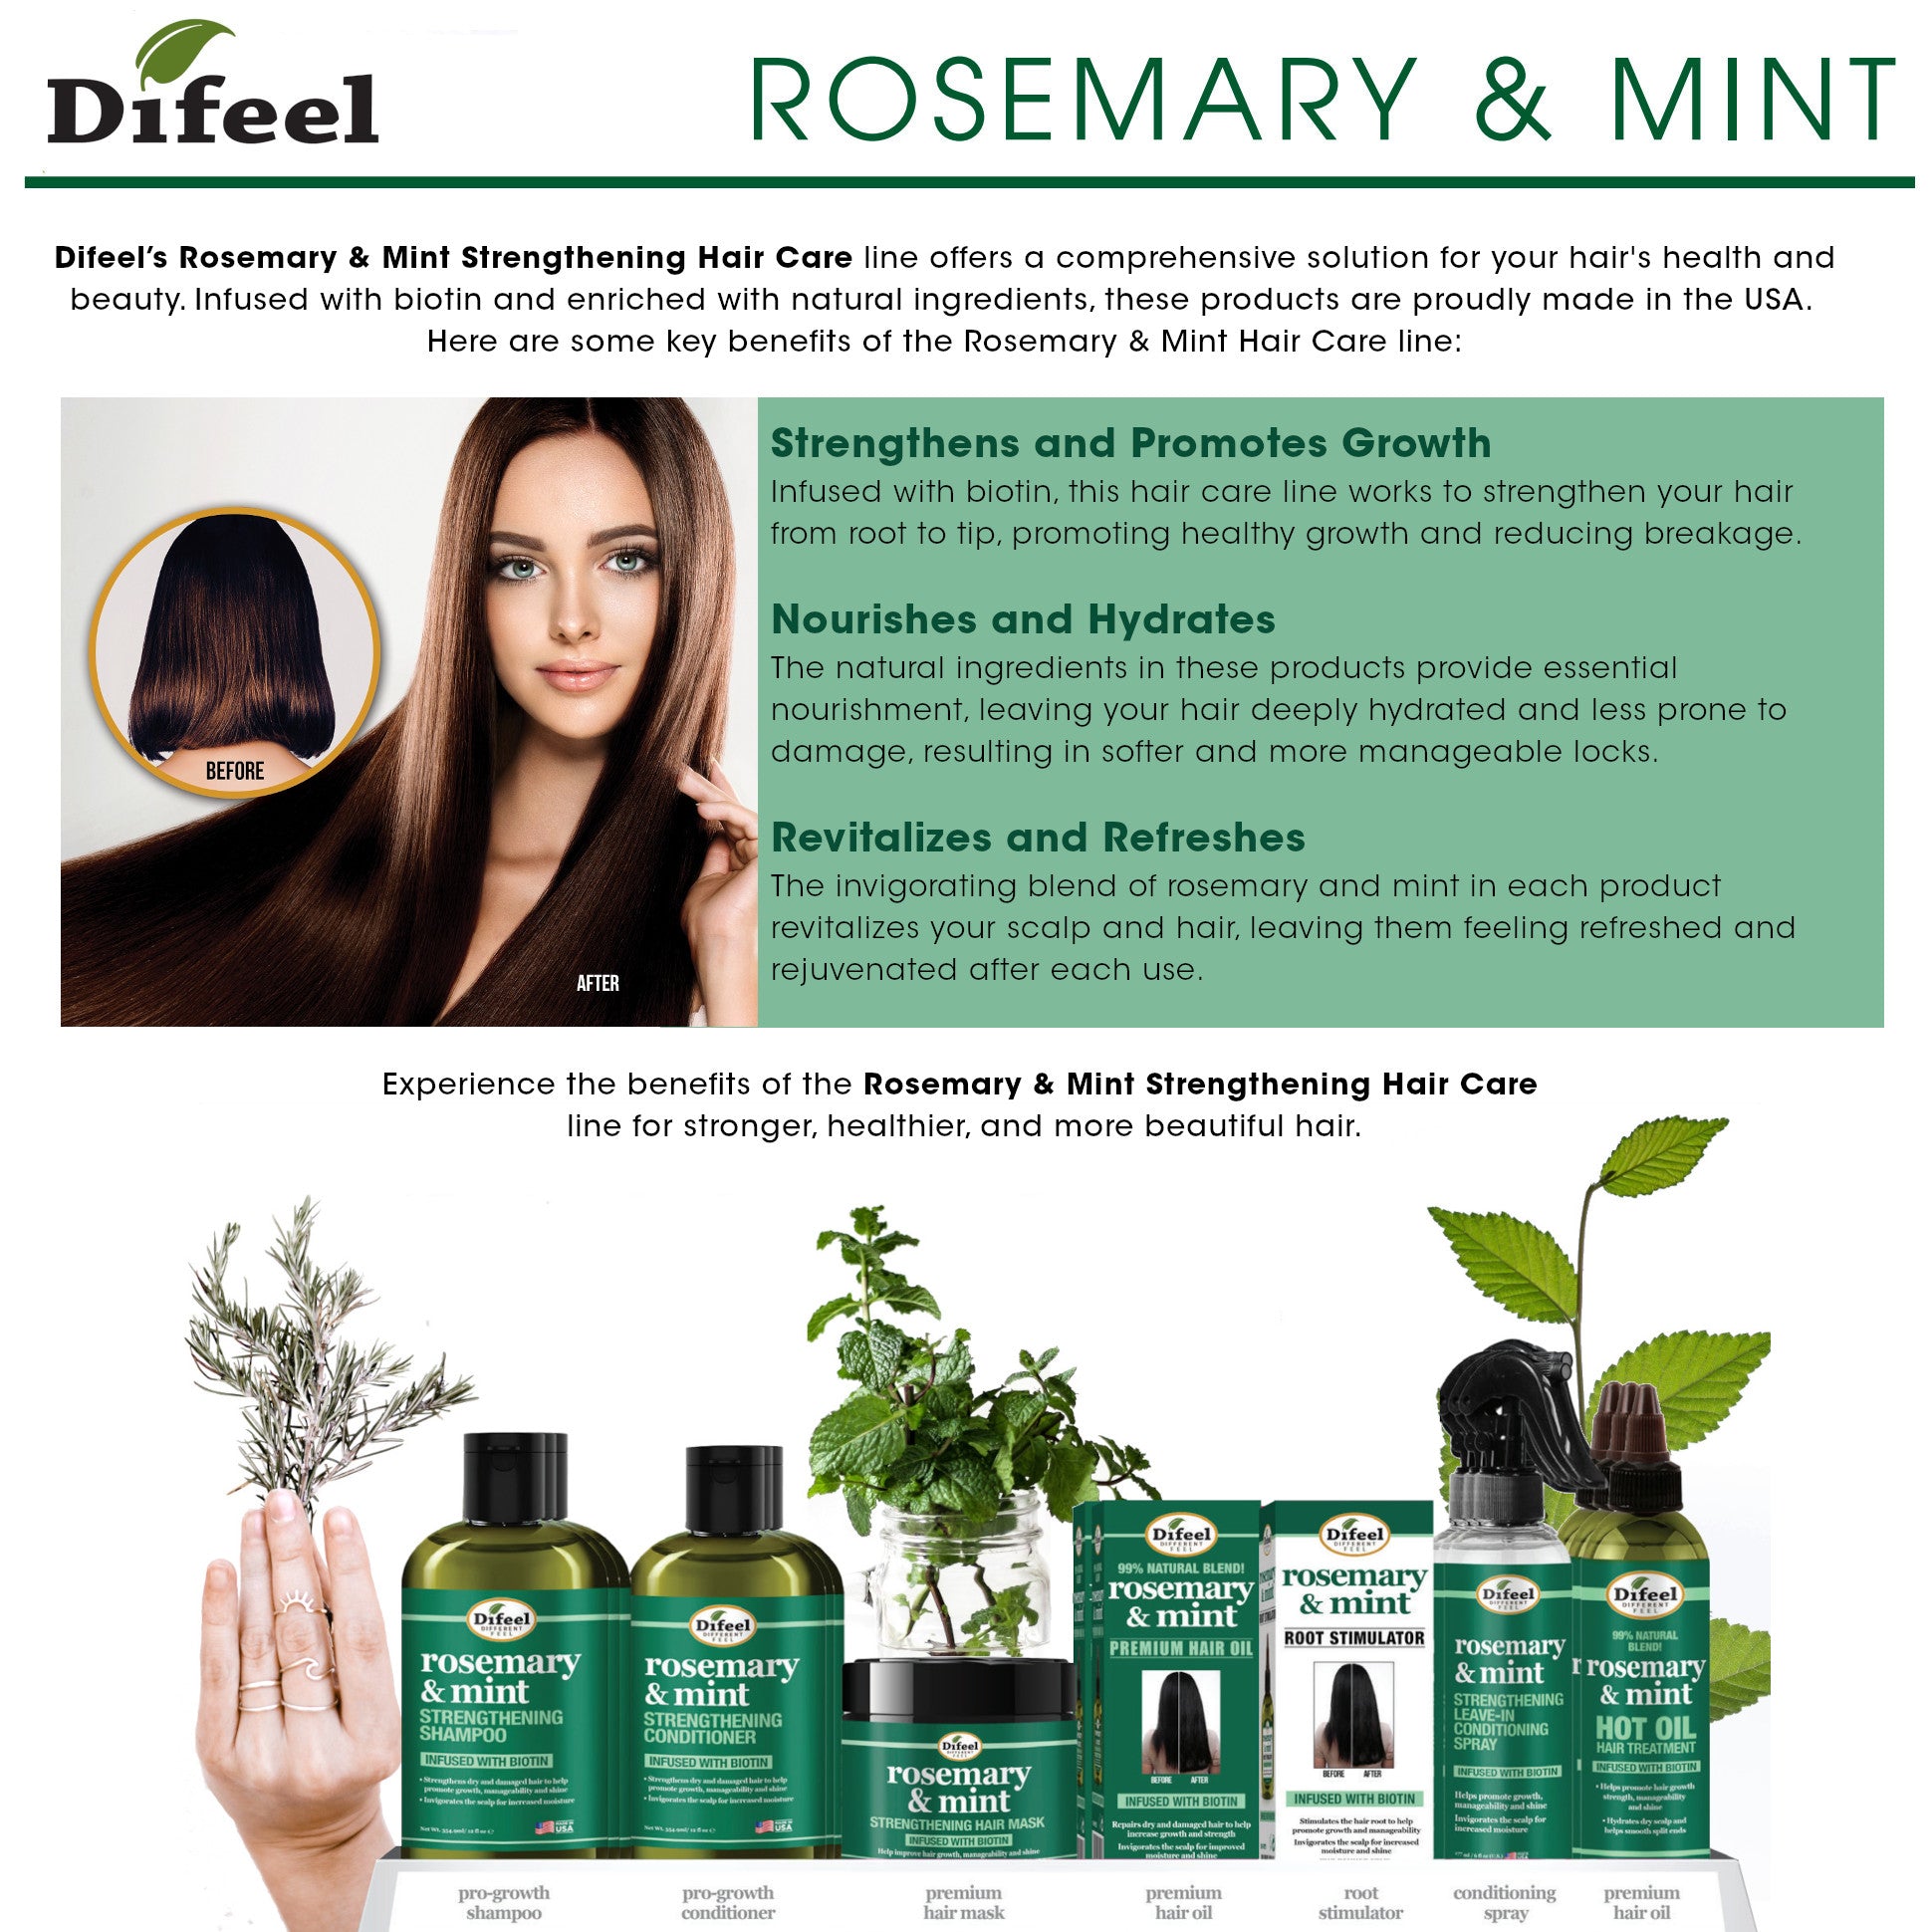 Difeel Rosemary Mint with Biotin Shampoo & Conditioner Combo Packet 2oz.